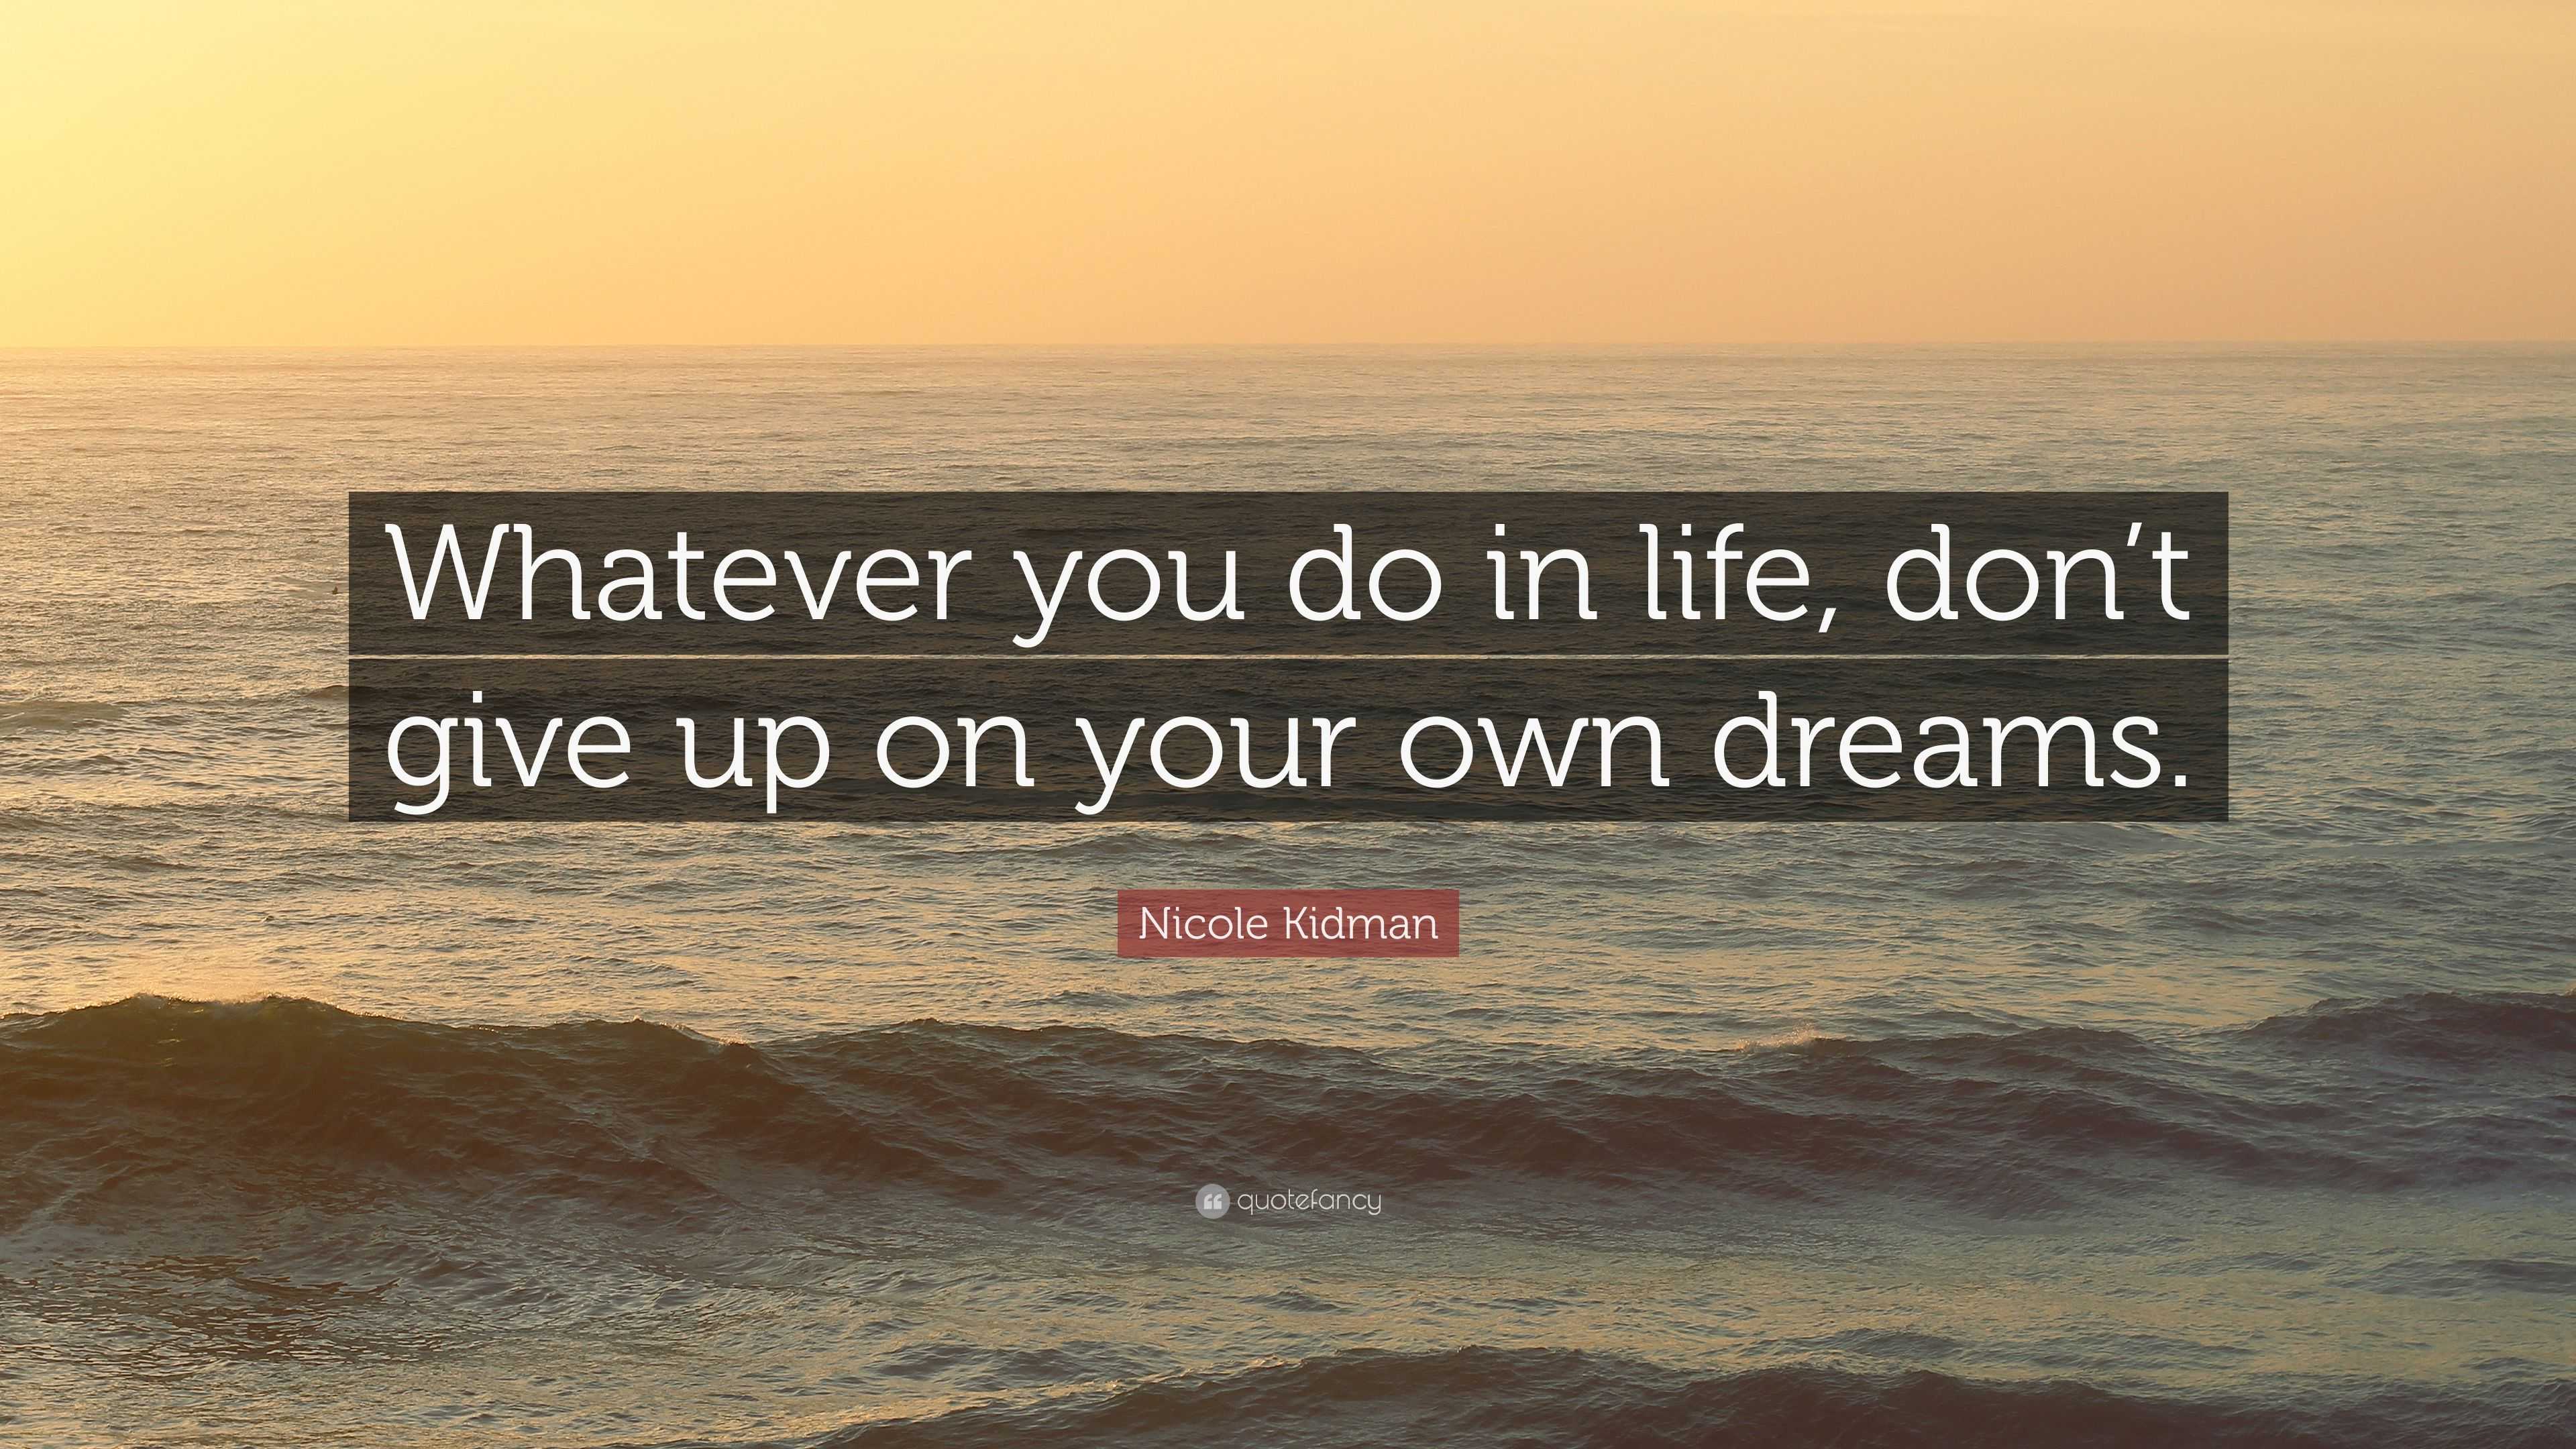 Nicole Kidman Quote: “Whatever you do in life, don’t give up on your ...